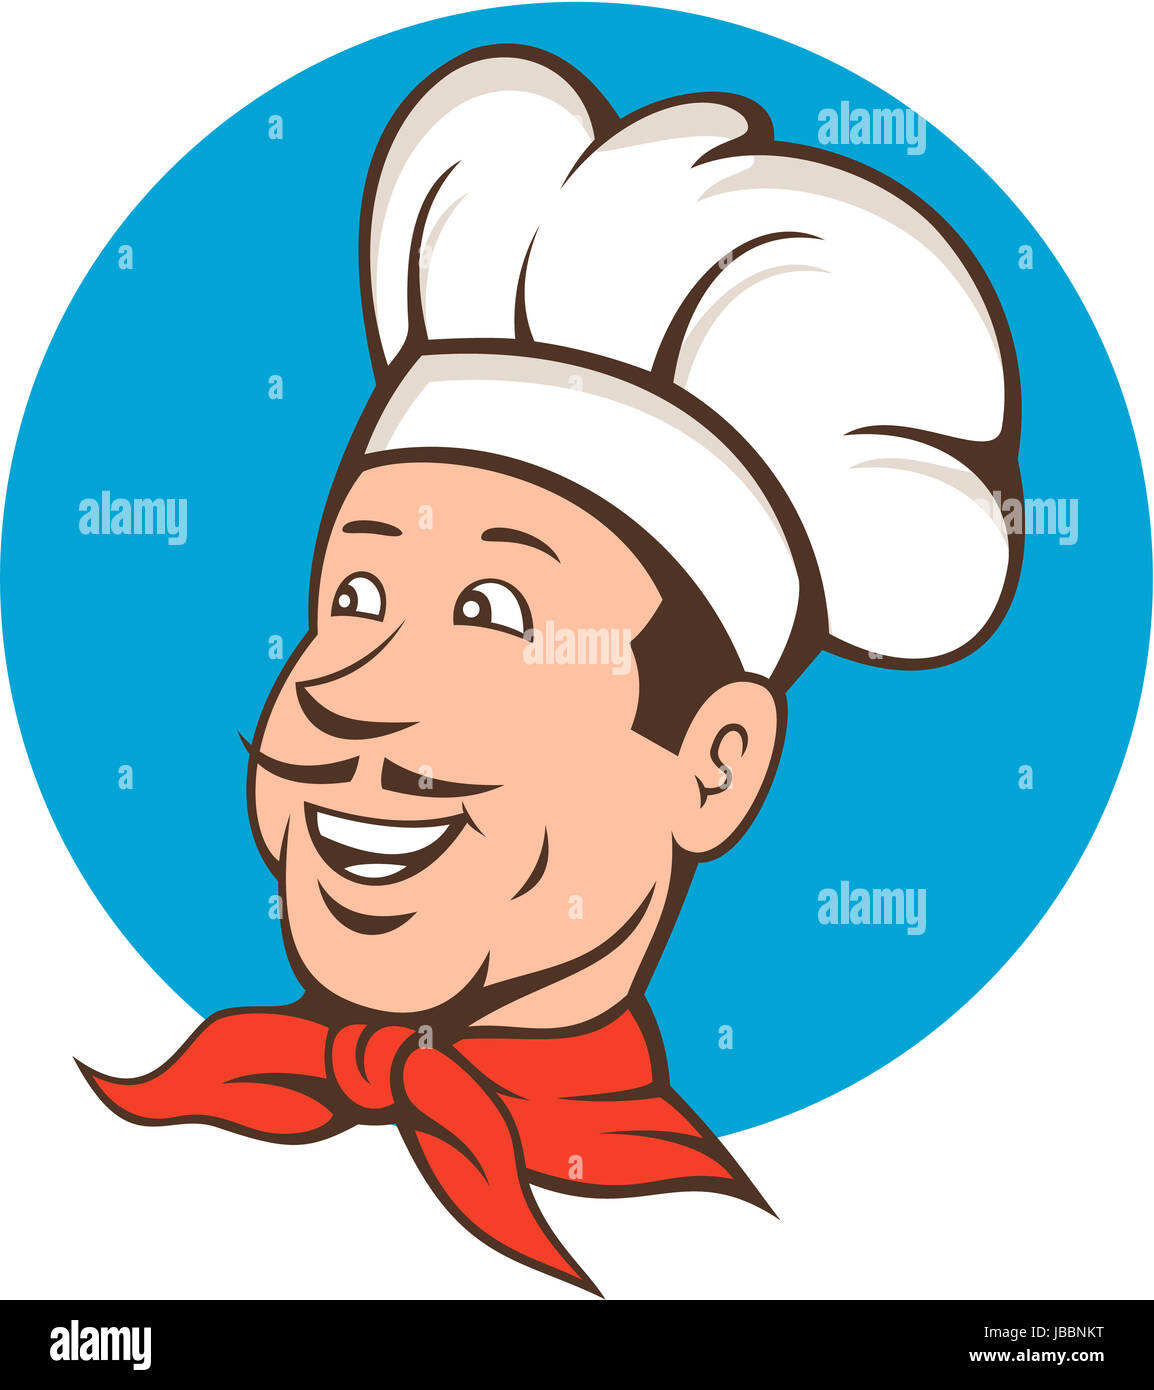 Illustration of a chef cook baker with moustache wearing bandana on neck and facing front set inside circle done in cartoon style. Stock Photo